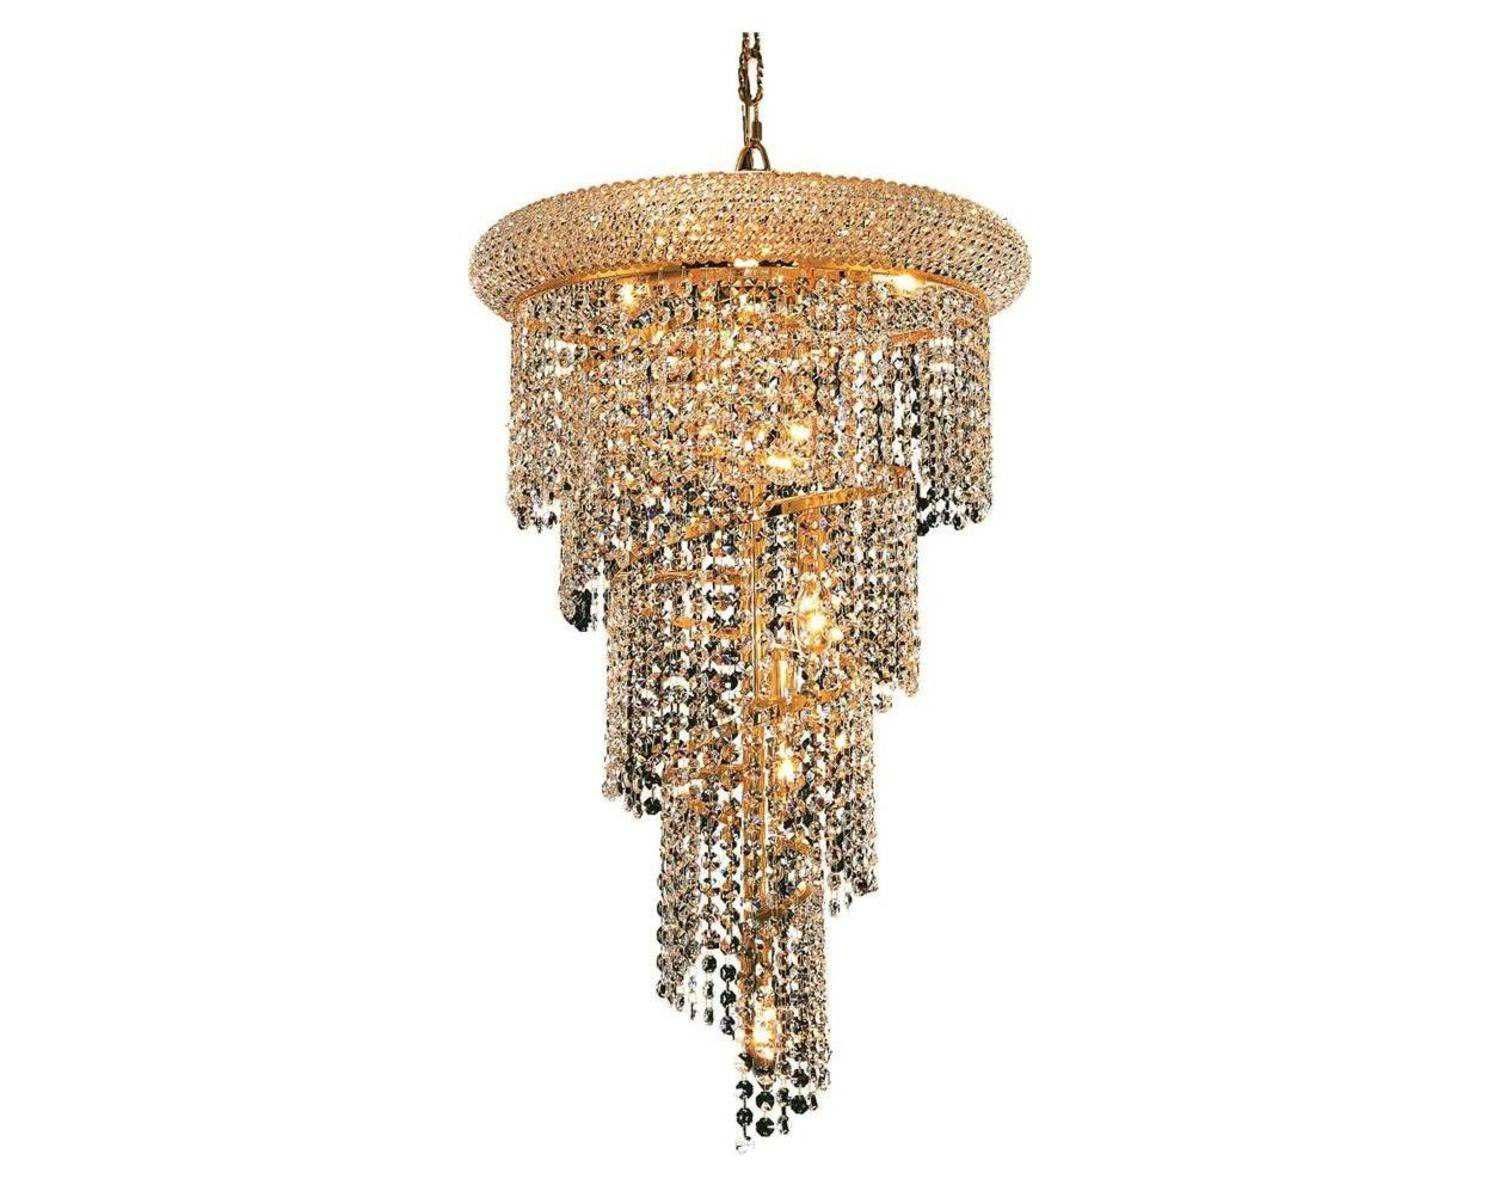 Elegant Lighting Spiral Royal Cut Gold & Crystal Eight Intended For Royal Cut Crystal Chandeliers (View 10 of 15)